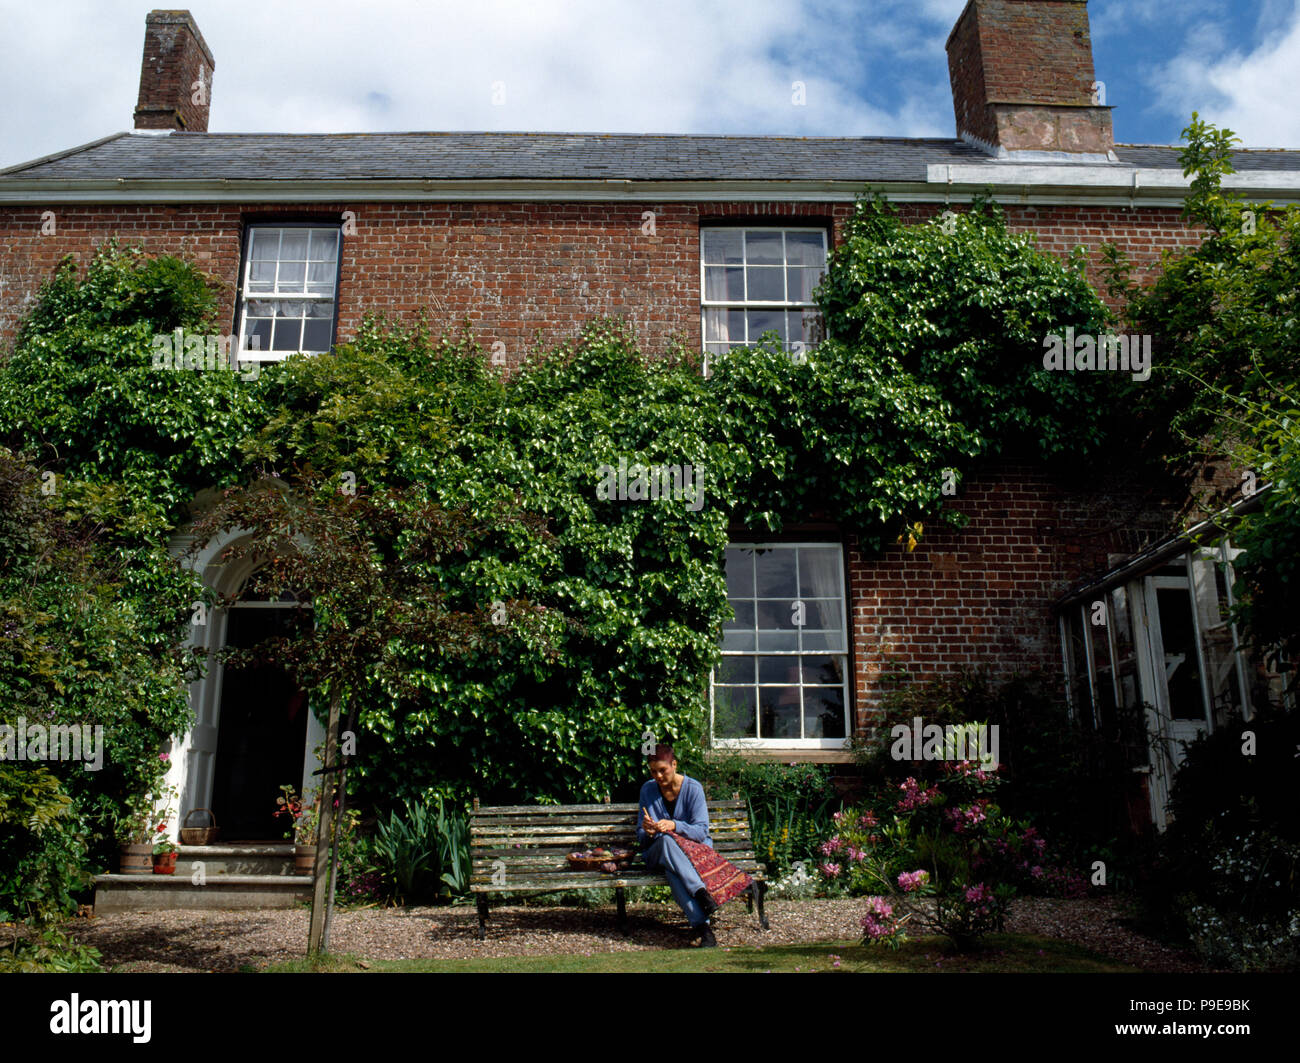 Exterior of a Victorian house with Virginia creeper on the walls and a woman sitting on bench and sewing Stock Photo